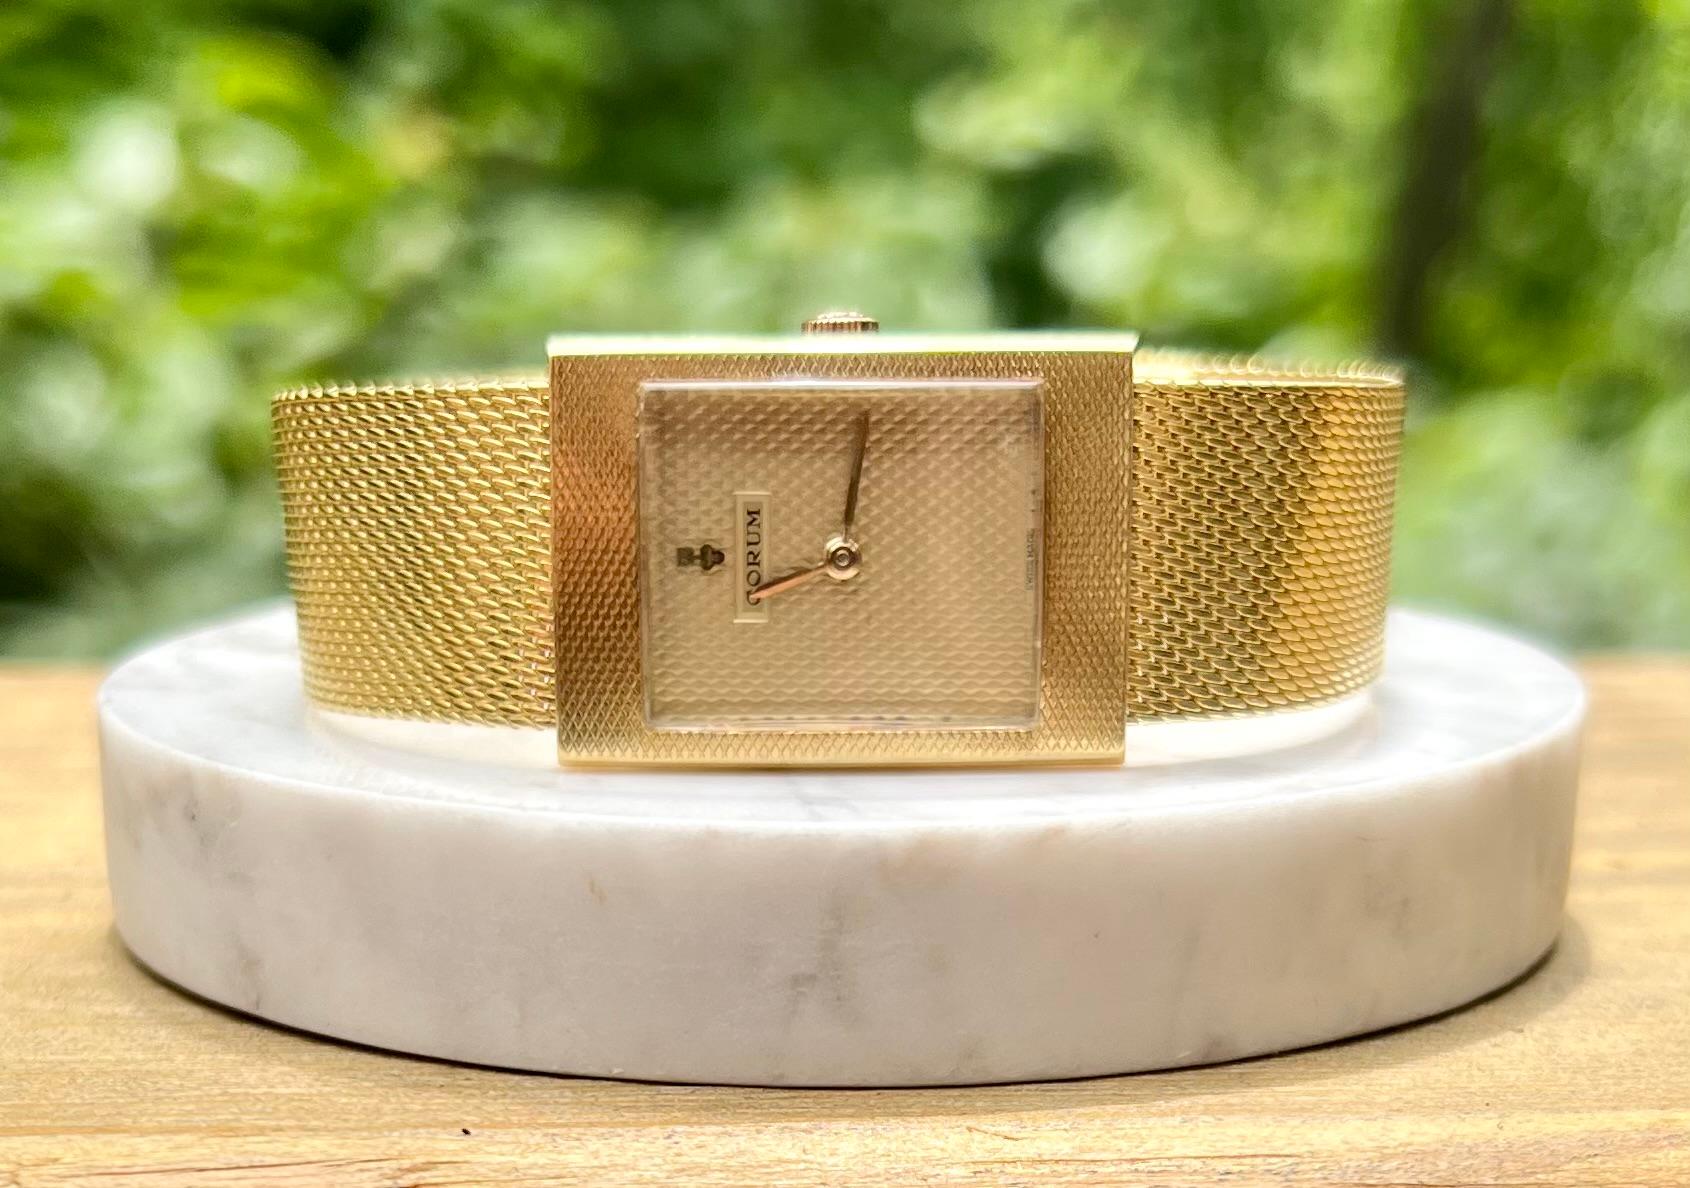 One 18 karat yellow gold vintage Swiss made Corum ladies watch with adjustable mesh band.  The dial case measures 30.52mm x 21.85mm.  